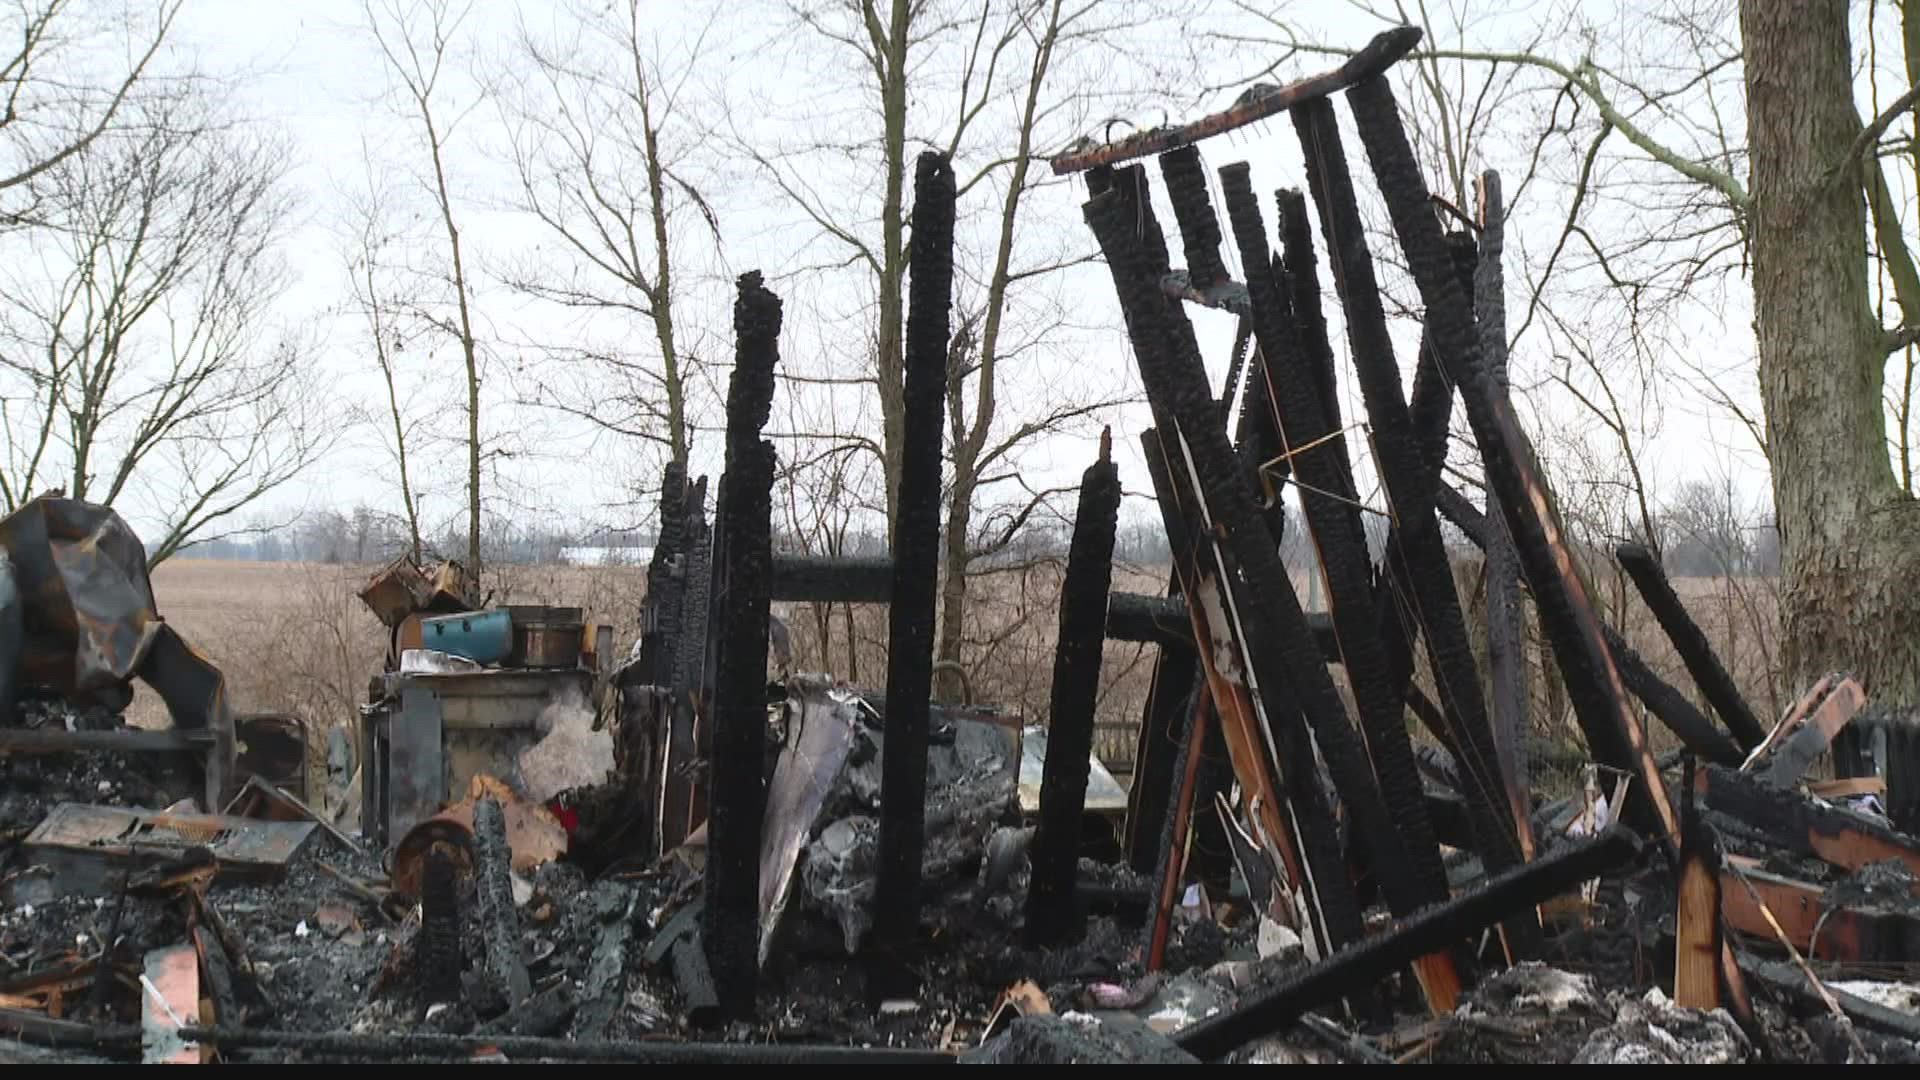 The family's home burned down right before Christmas.